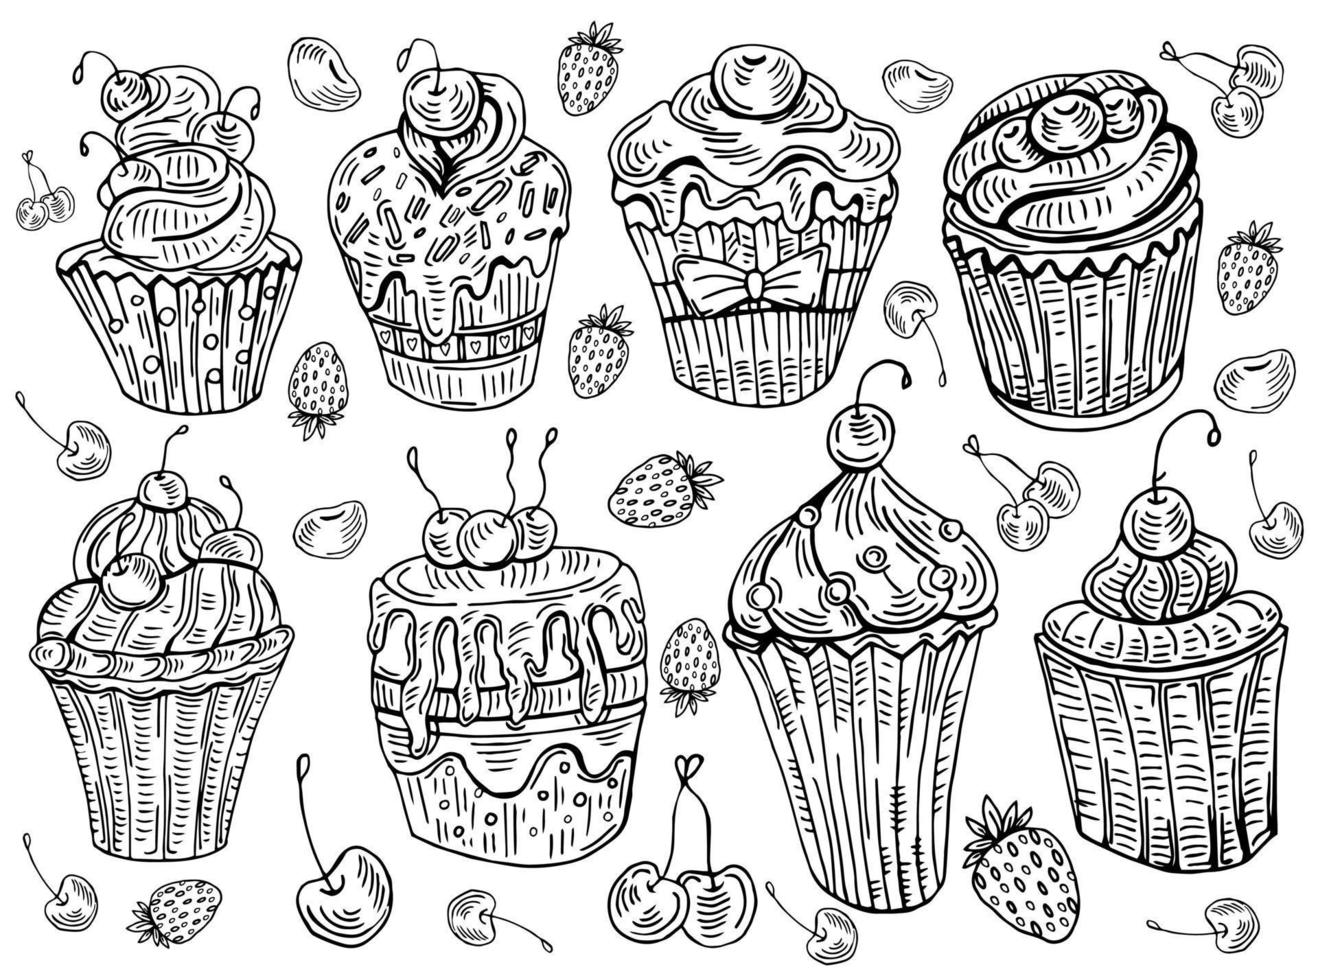 hand-drawn cupcakes set in sketch style vector